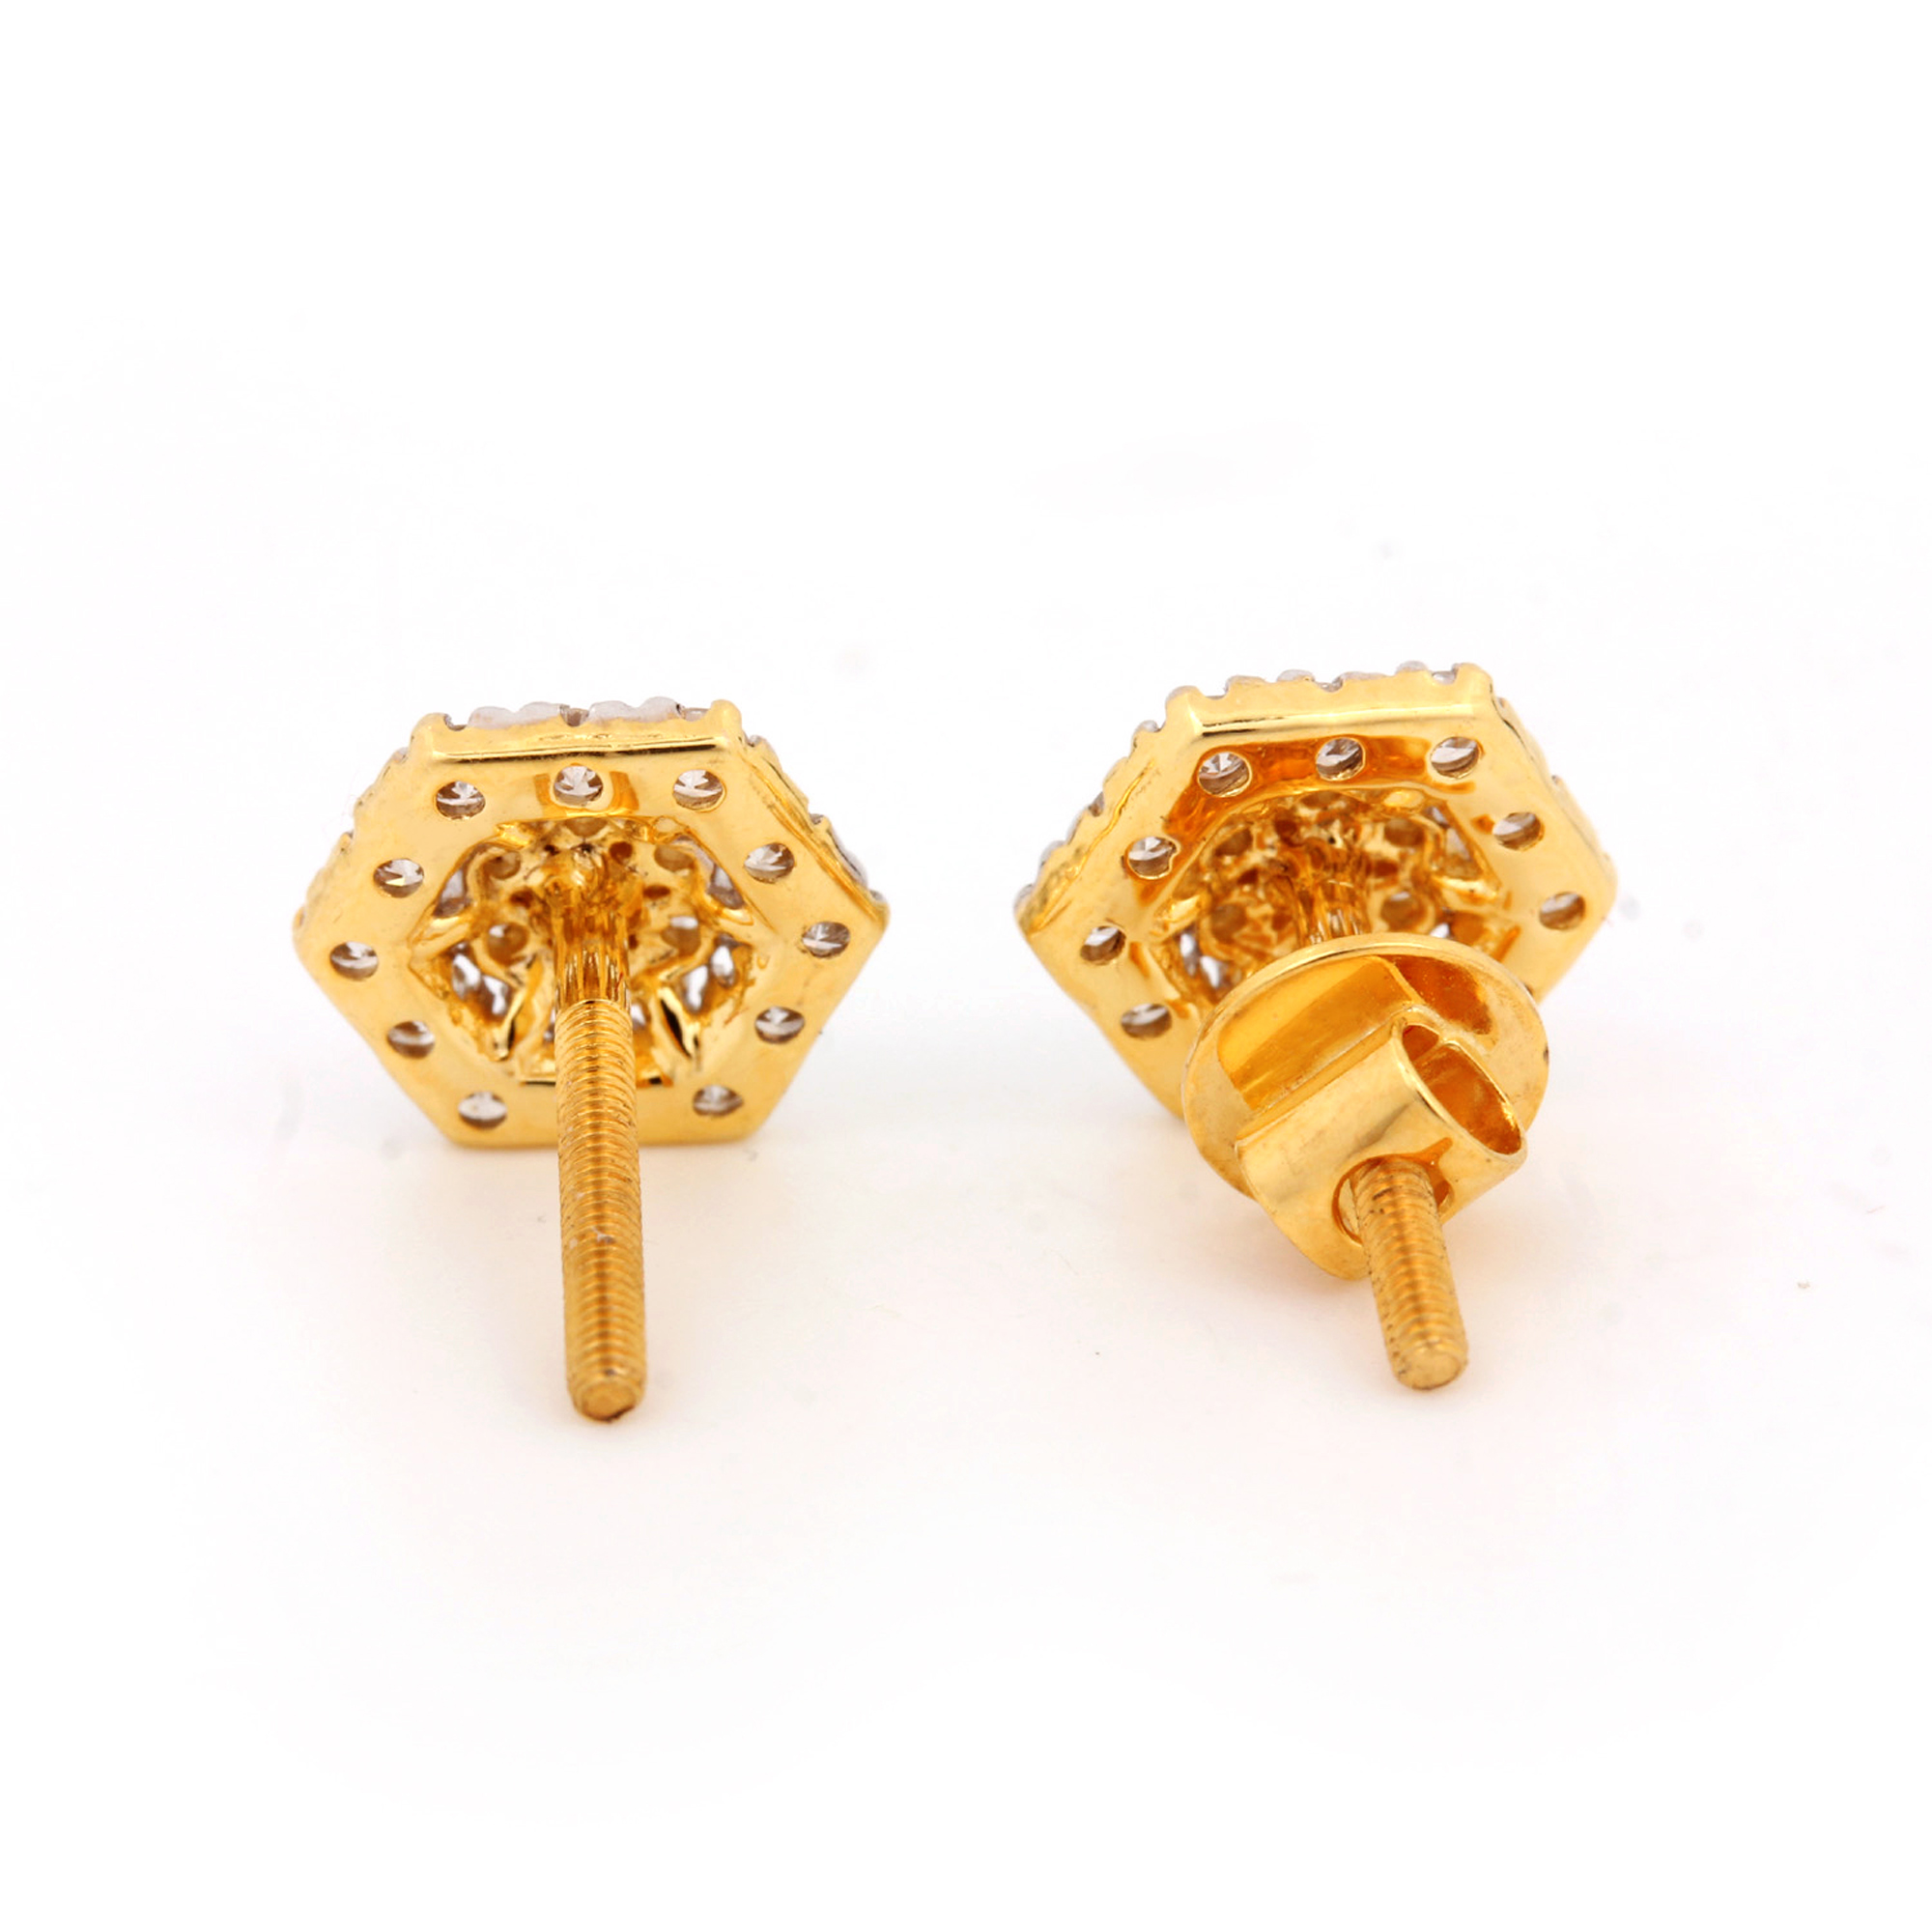 Hexagon Faceted Earrings Made in Gold Diamond